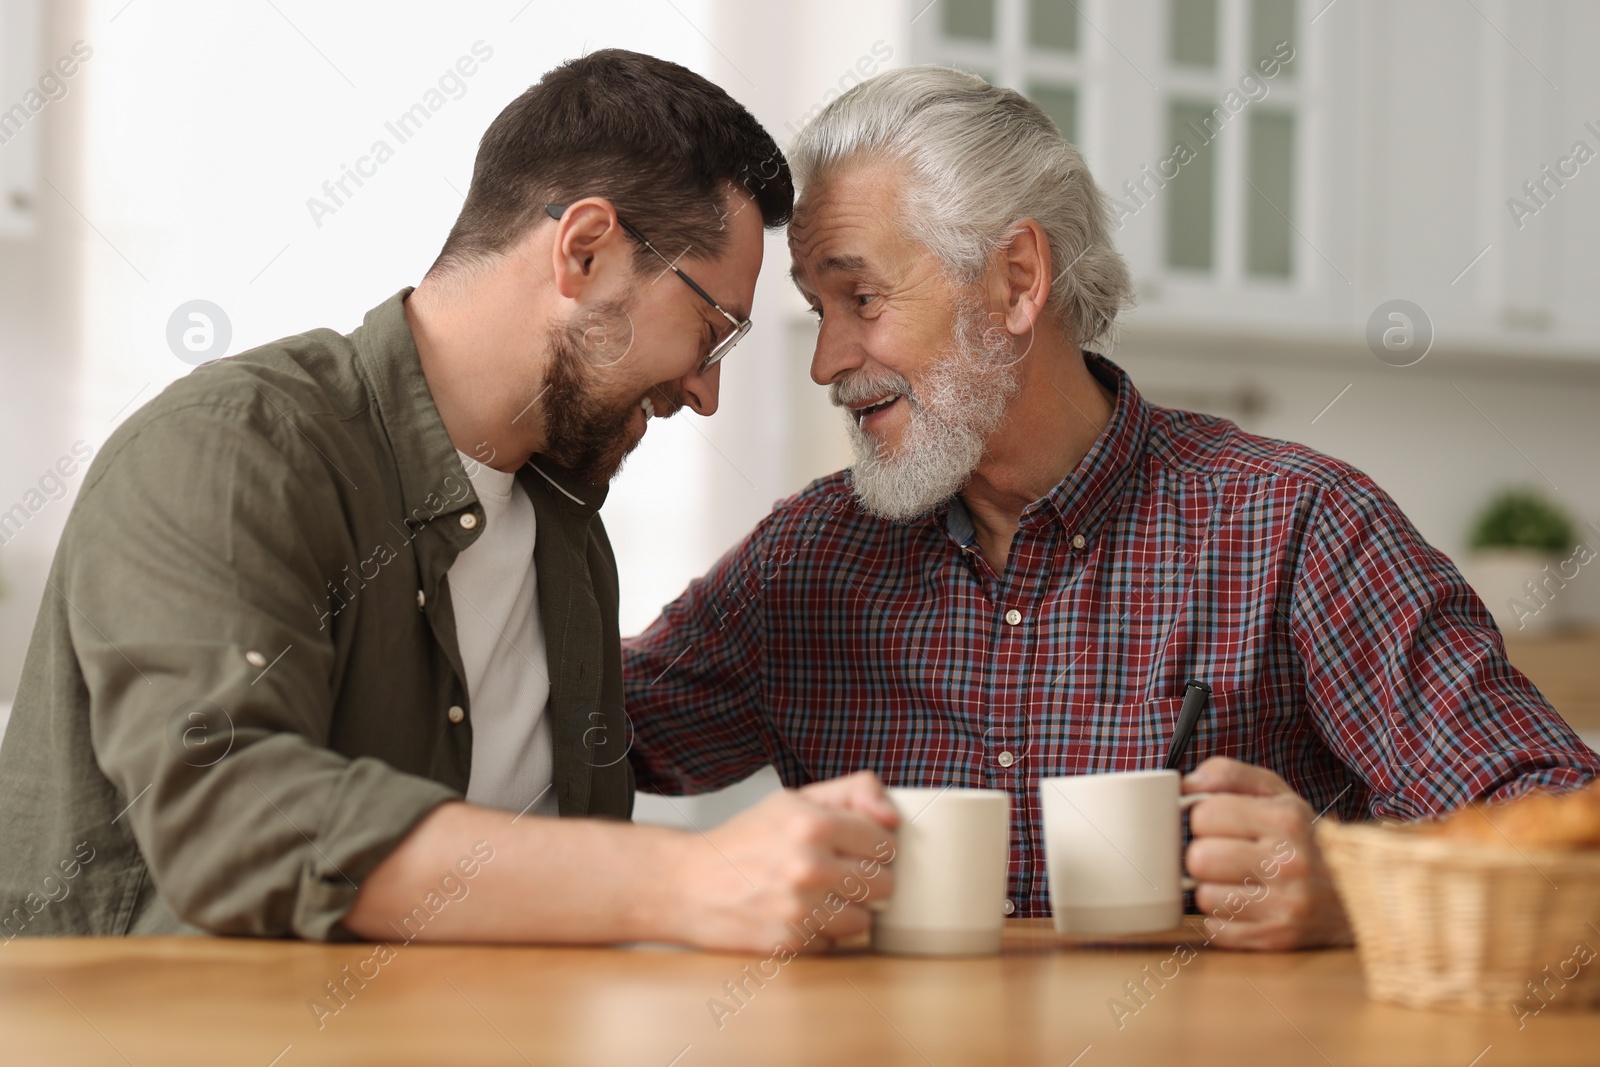 Photo of Happy son and his dad with cups at wooden table in kitchen